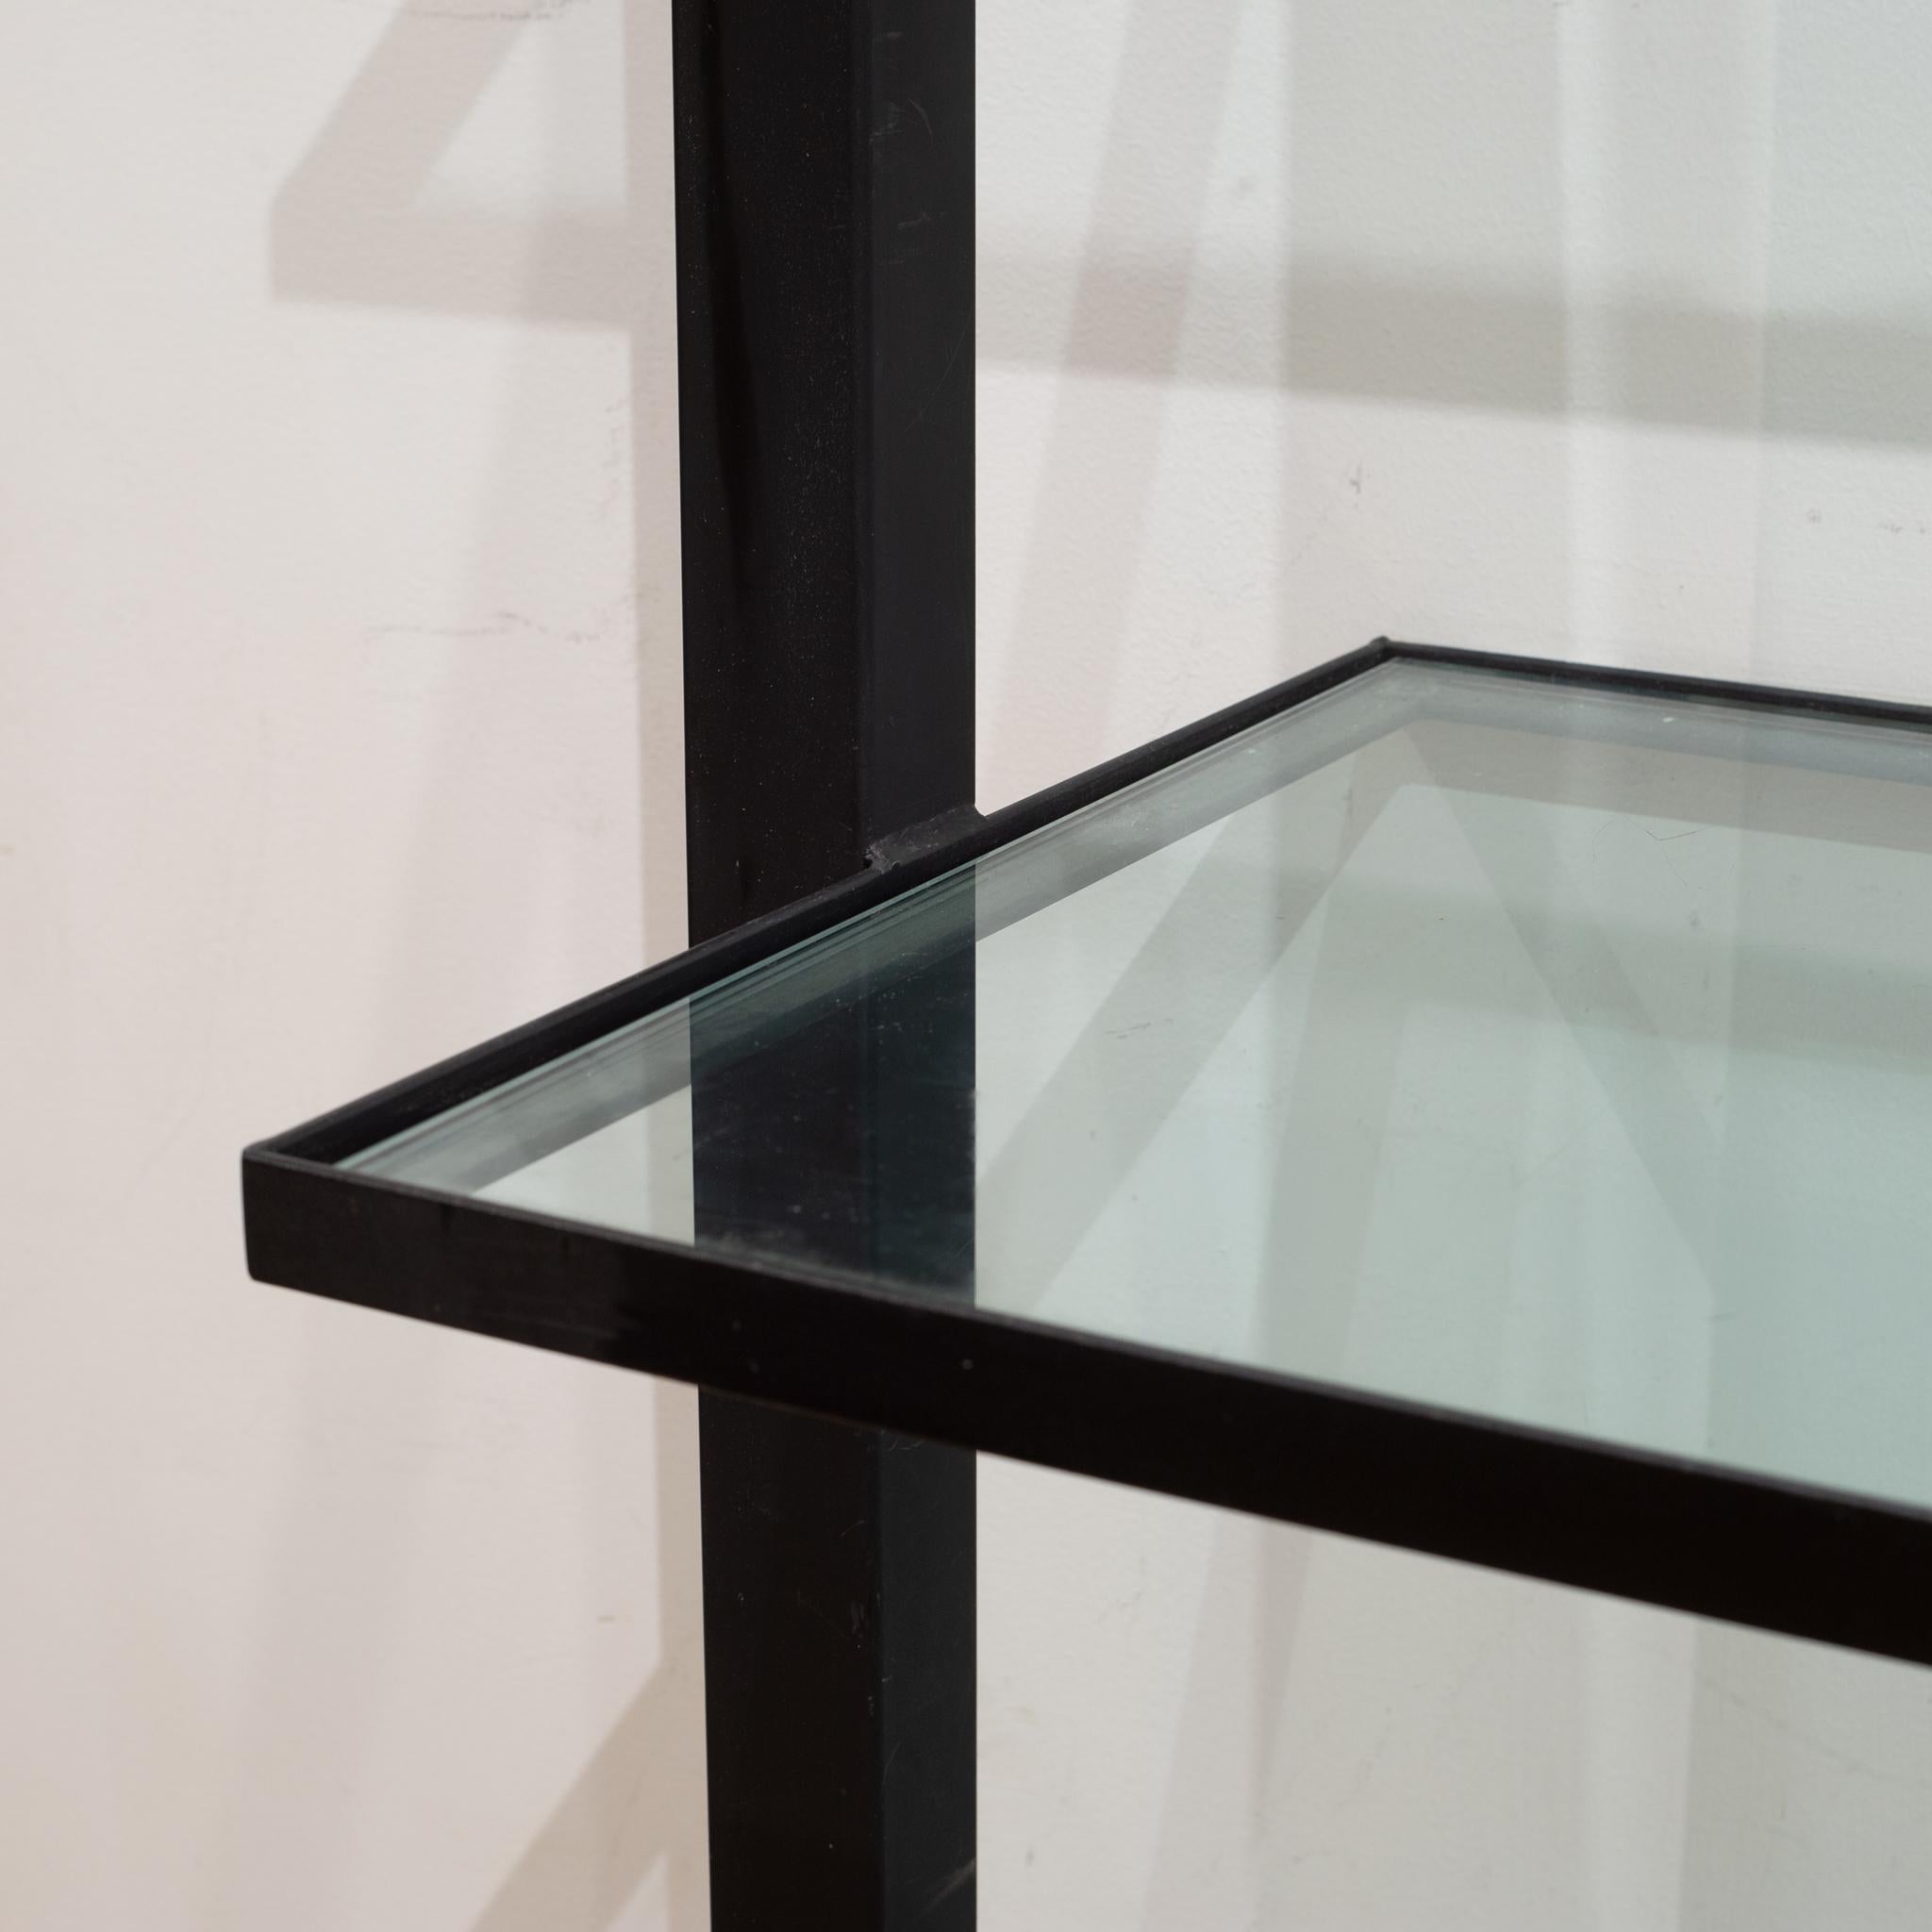 American Large Custom Floating Steel and Glass Shelf c. 2014 For Sale